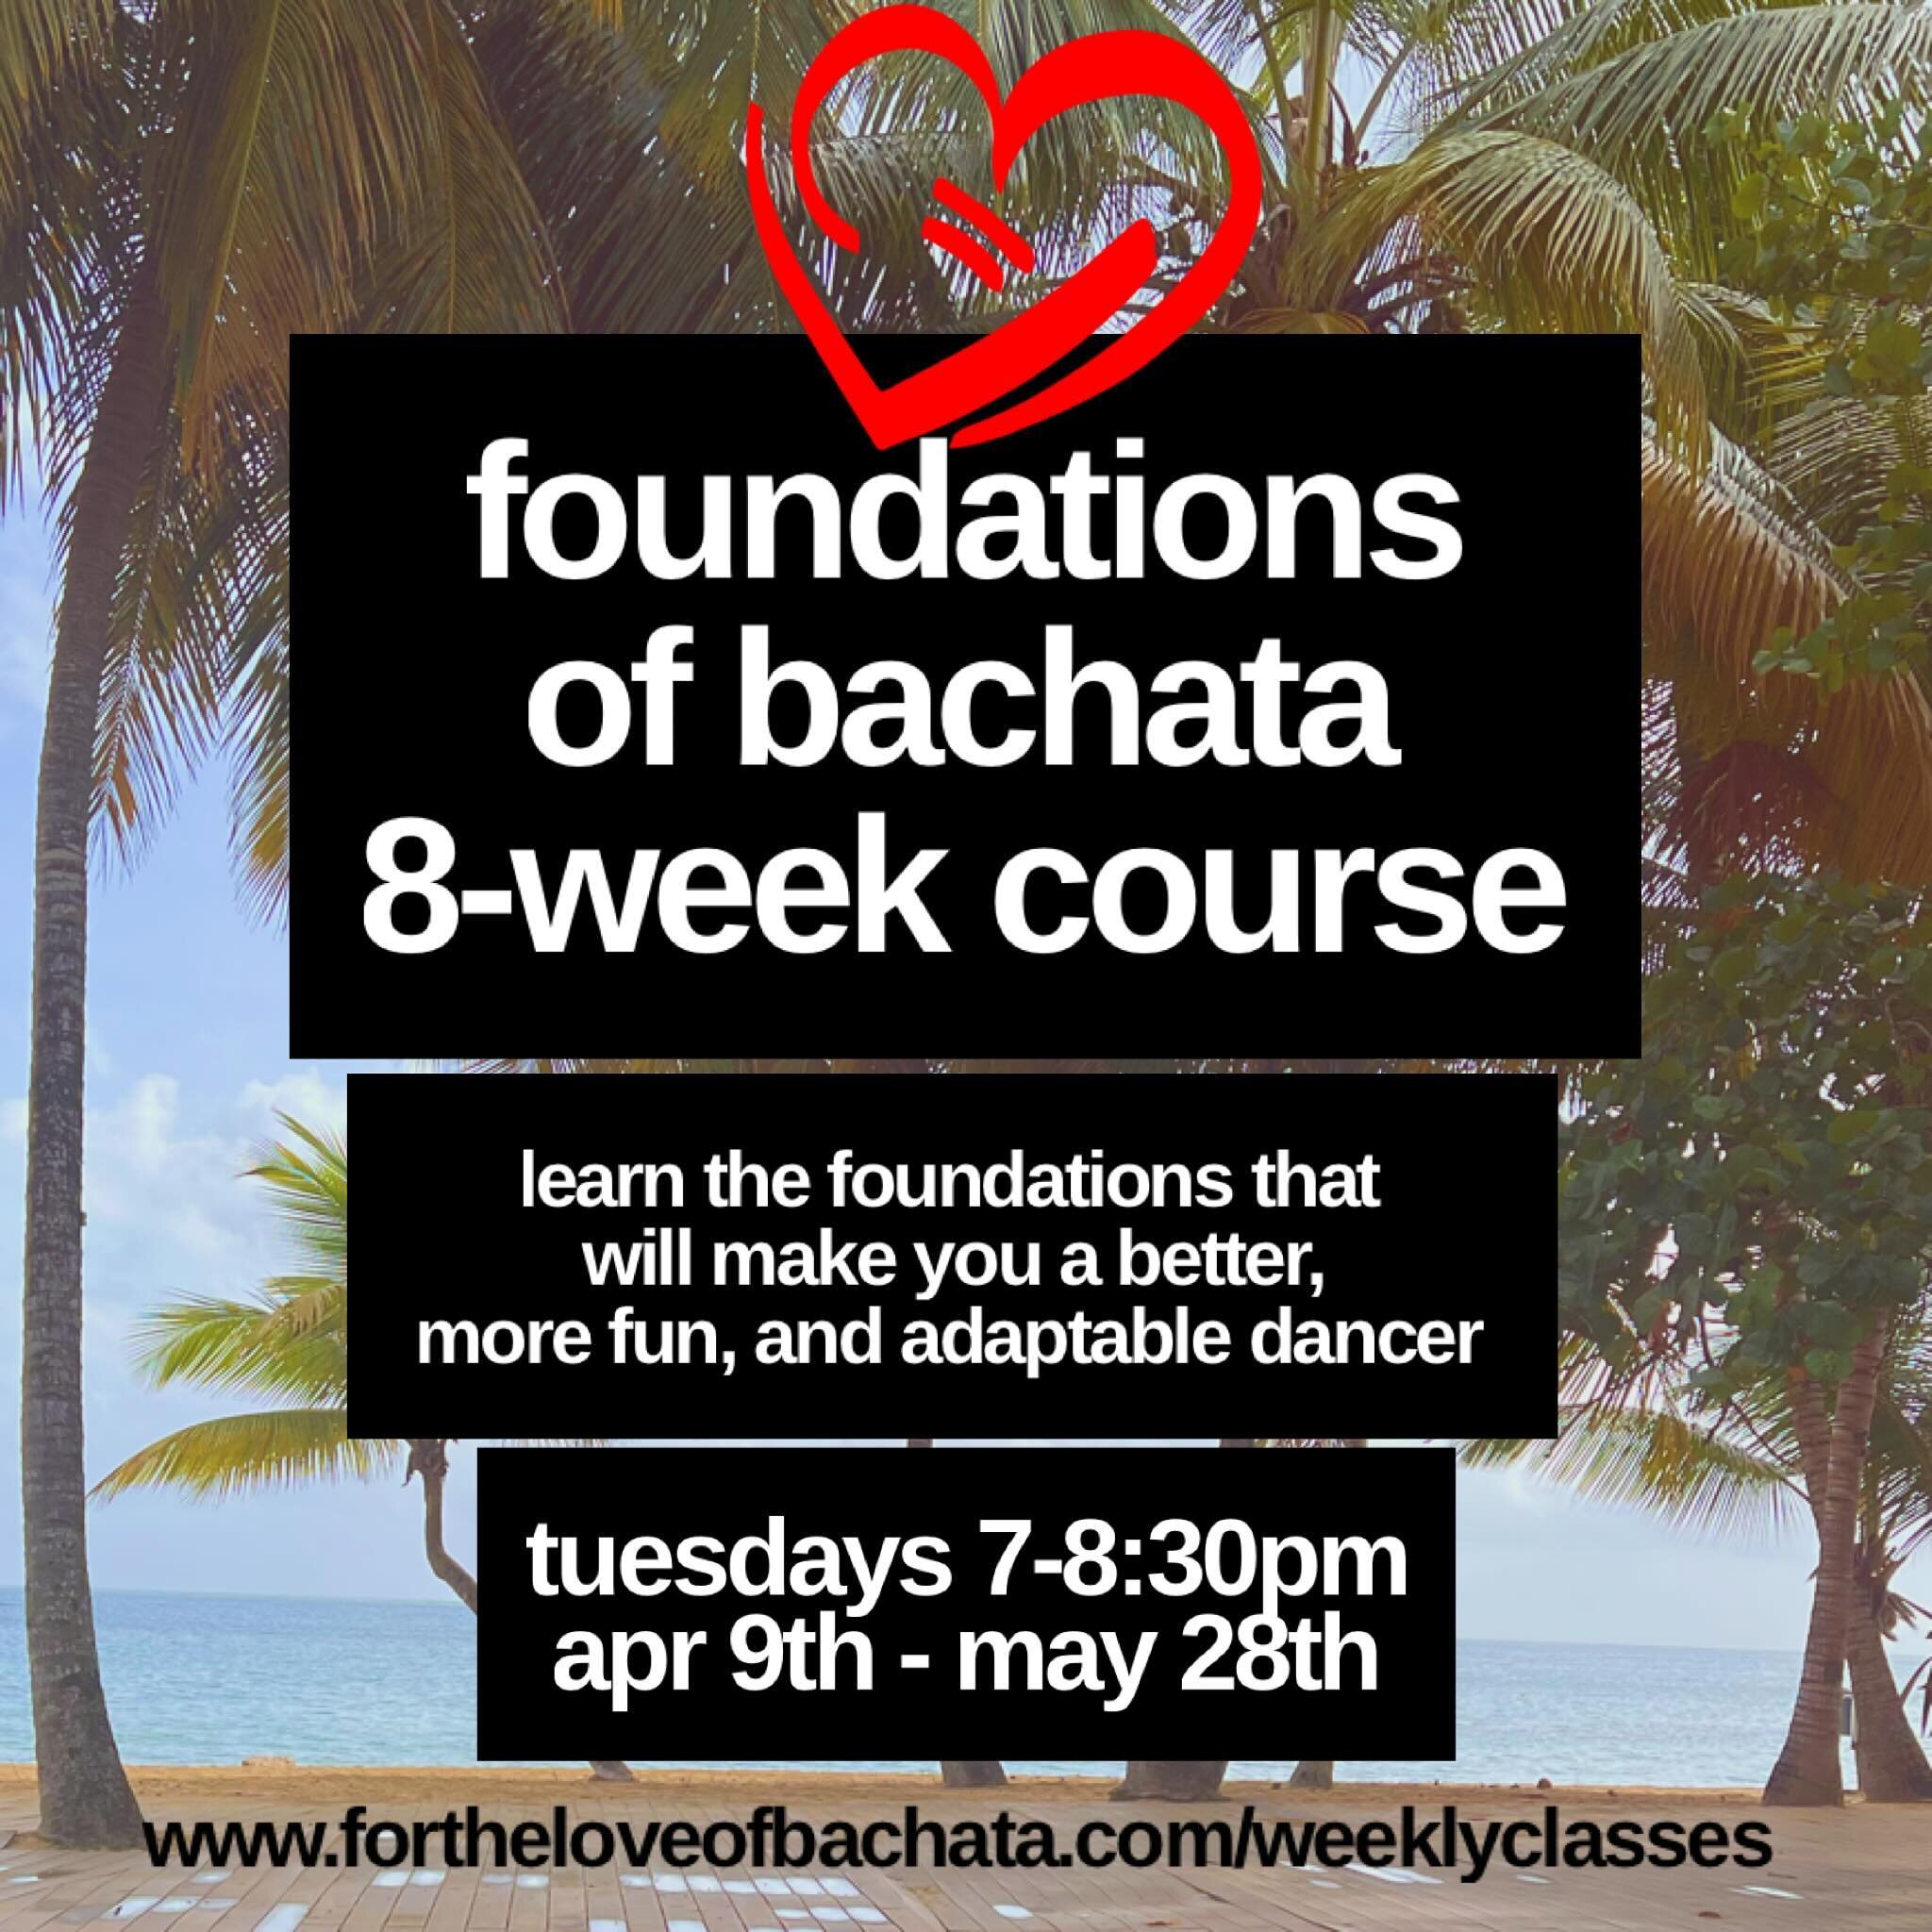 With all the rain and flooding throughout Pittsburgh last night, I made the decision to postpone the start of my 8-week Bachata course until Tuesday, April 9th. This session will continue through May 28th. 

If you were thinking about signing up but 